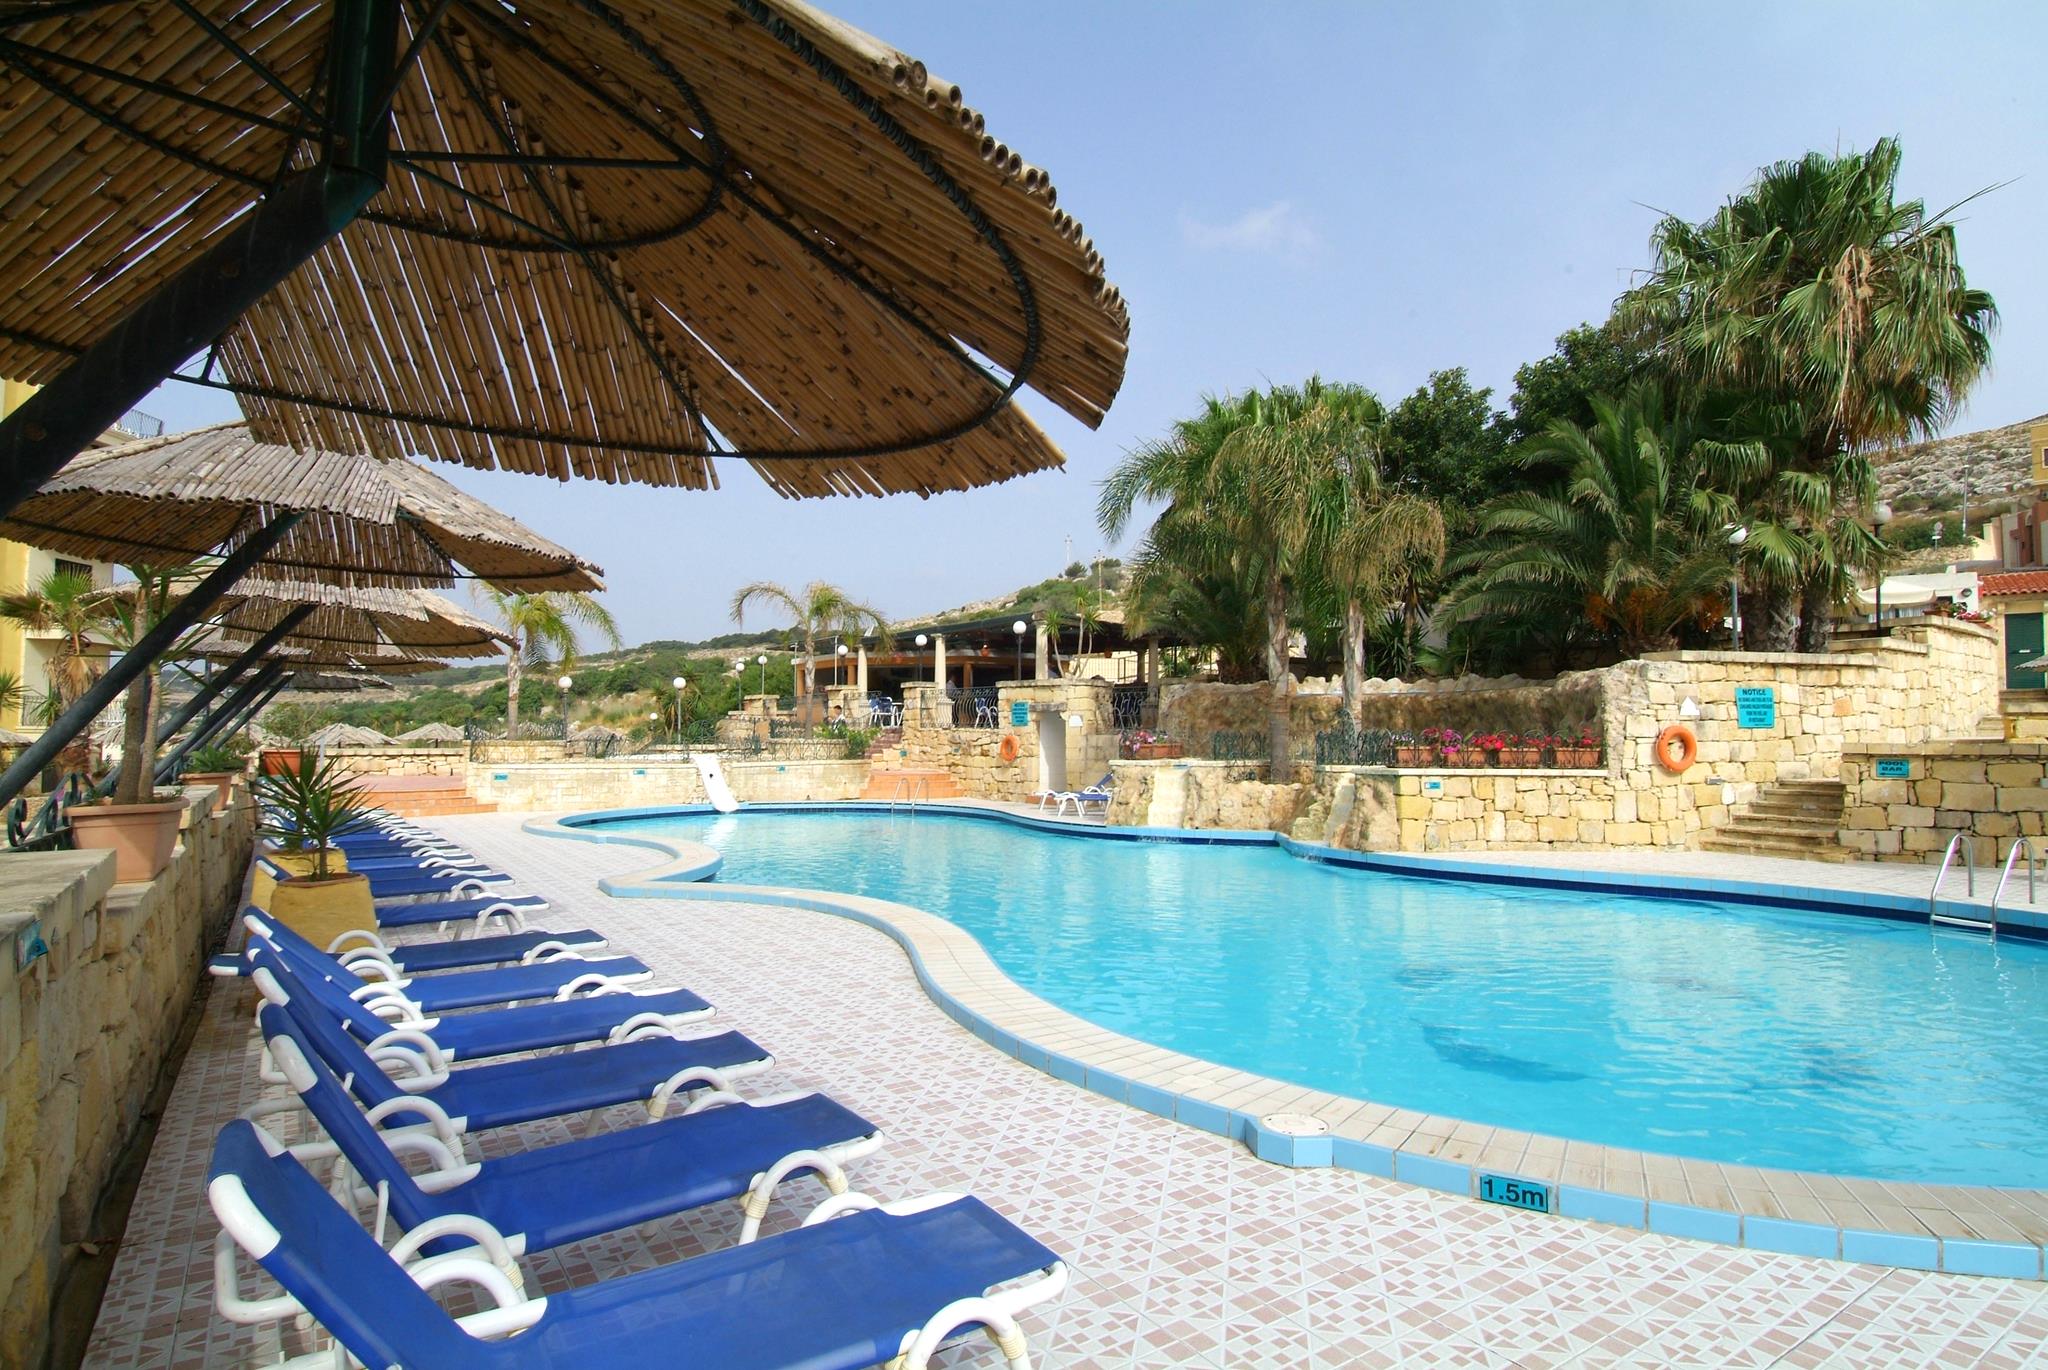 Spend A Day By The Pool At Our Hotel In Malta